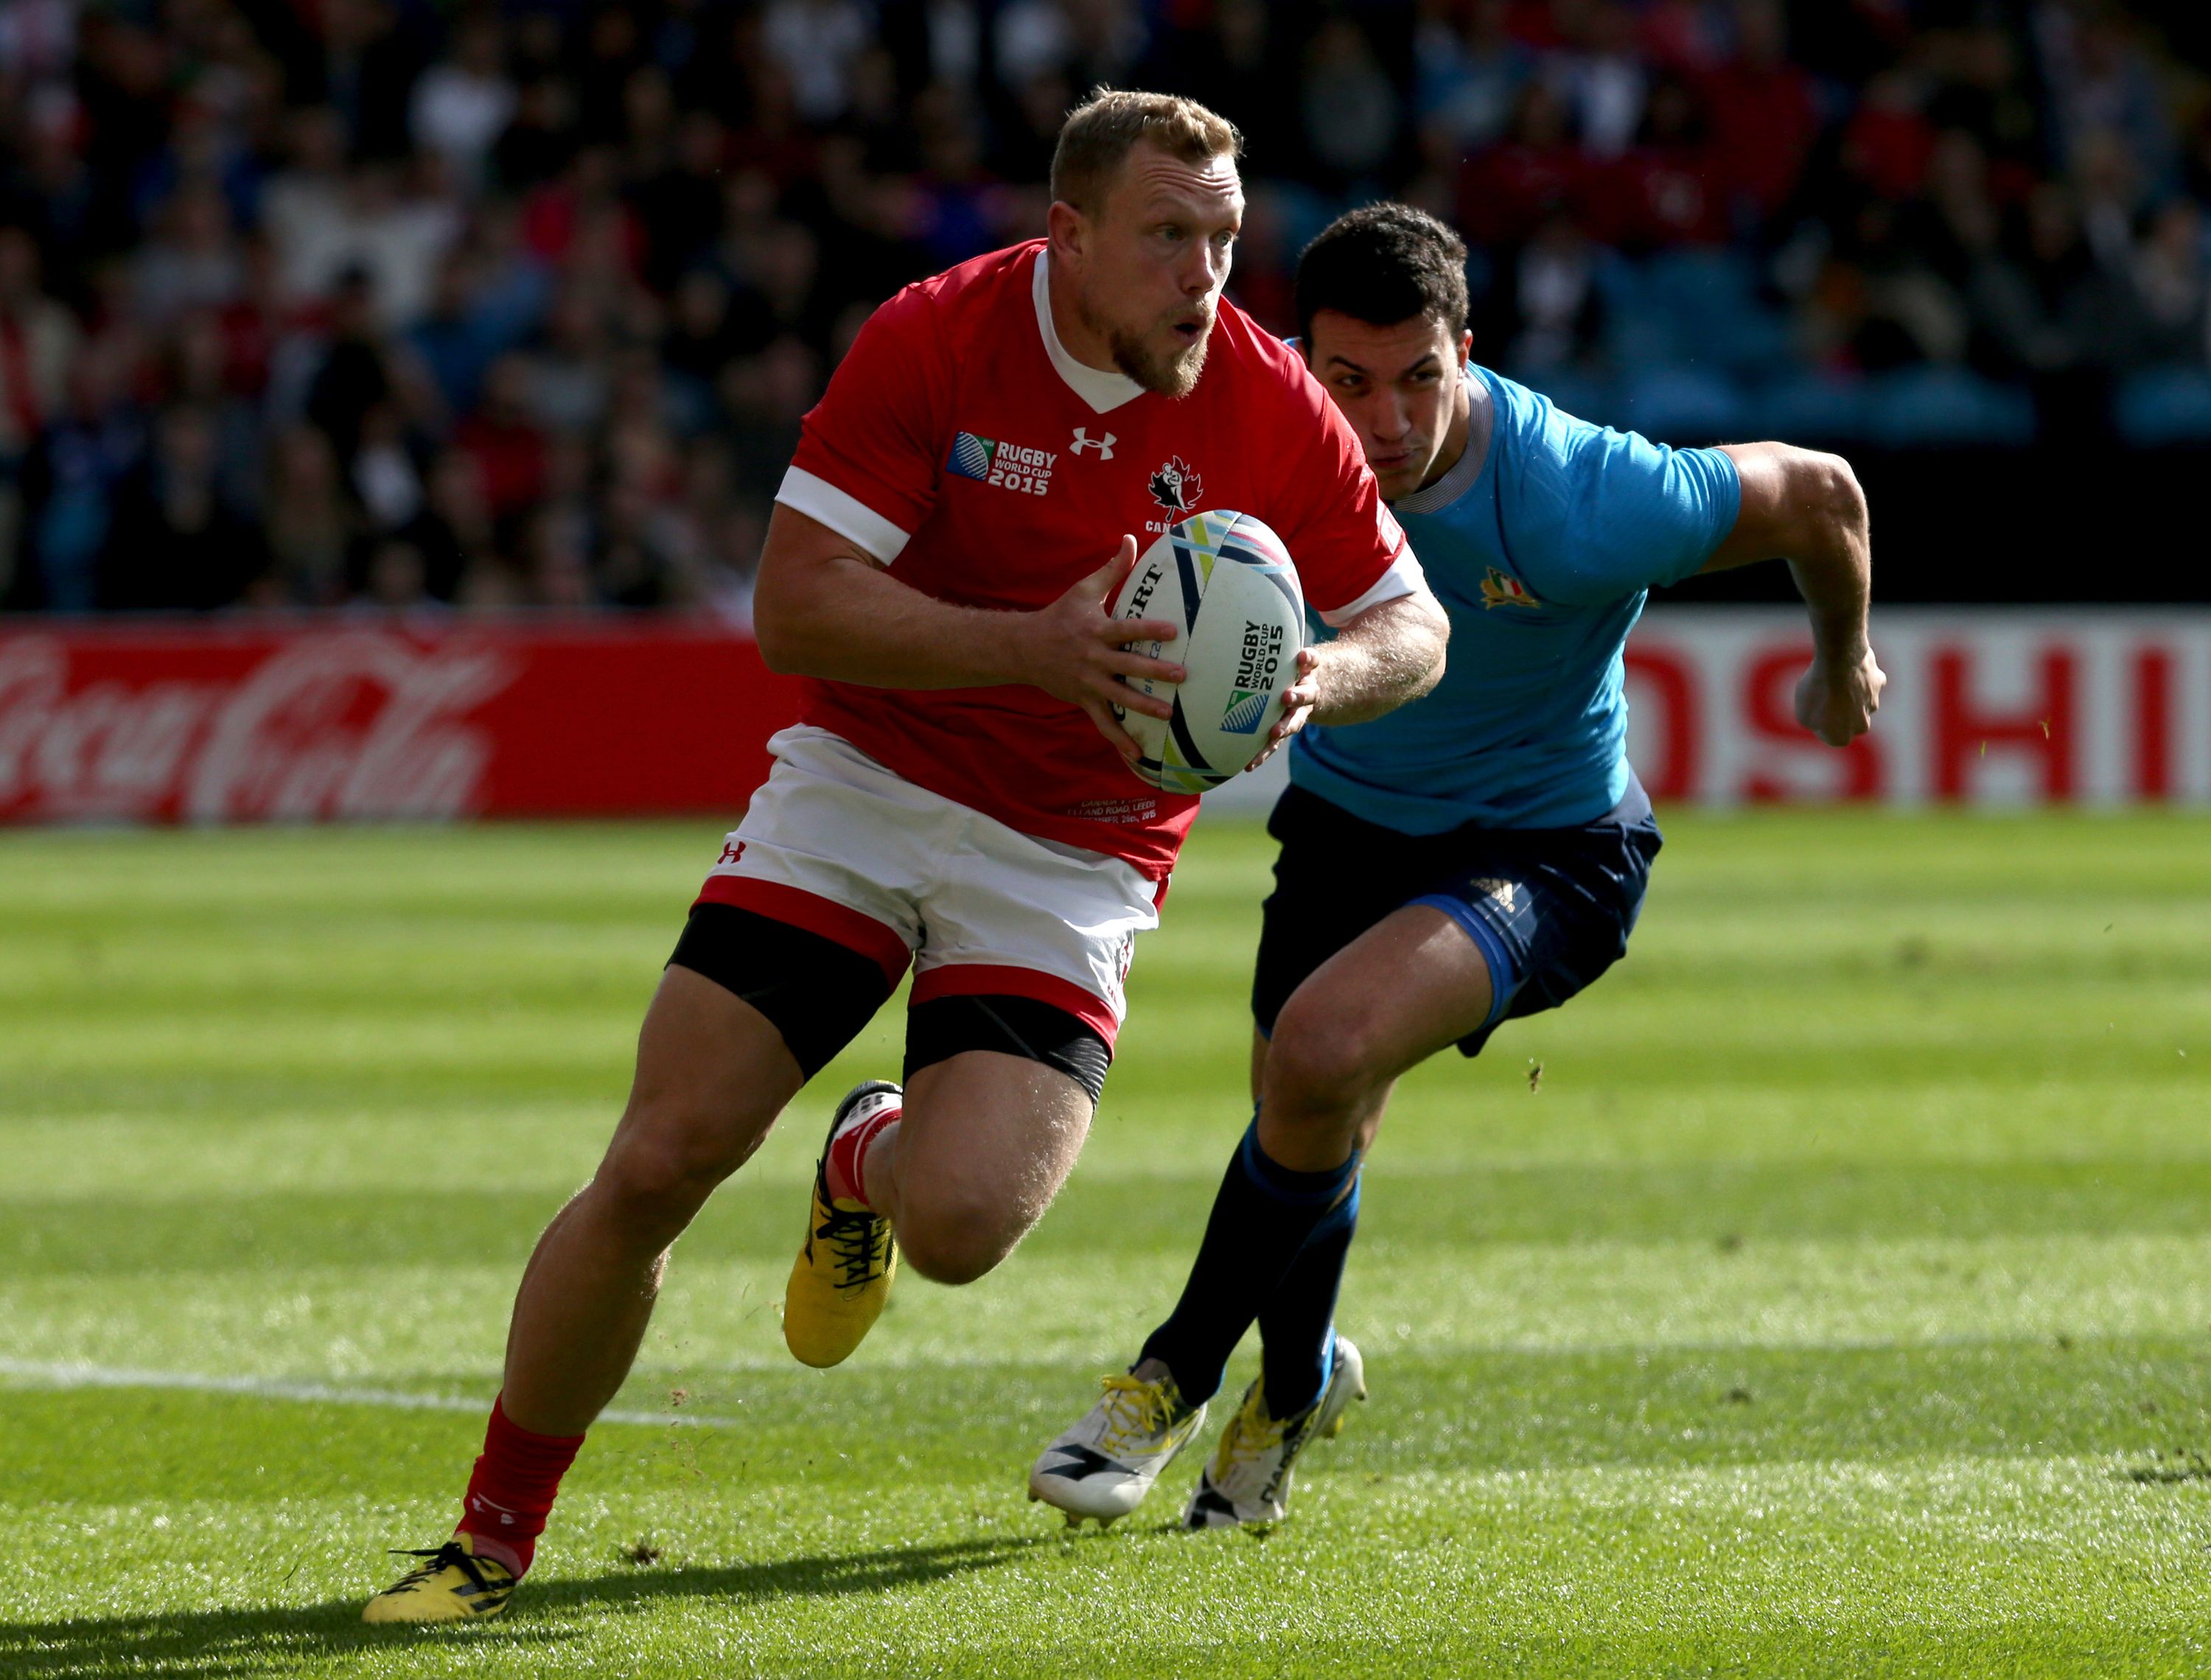 LEEDS, ENGLAND - SEPTEMBER 26 : Phil MacKenzie of Canada out runs Leonardo Sarto of Italy during the 2015 Rugby World Cup Pool D match between Italy and Canada at Elland Road on September 26, 2015 in Leeds England. (Photo by Mark Runnacles/Getty Images)